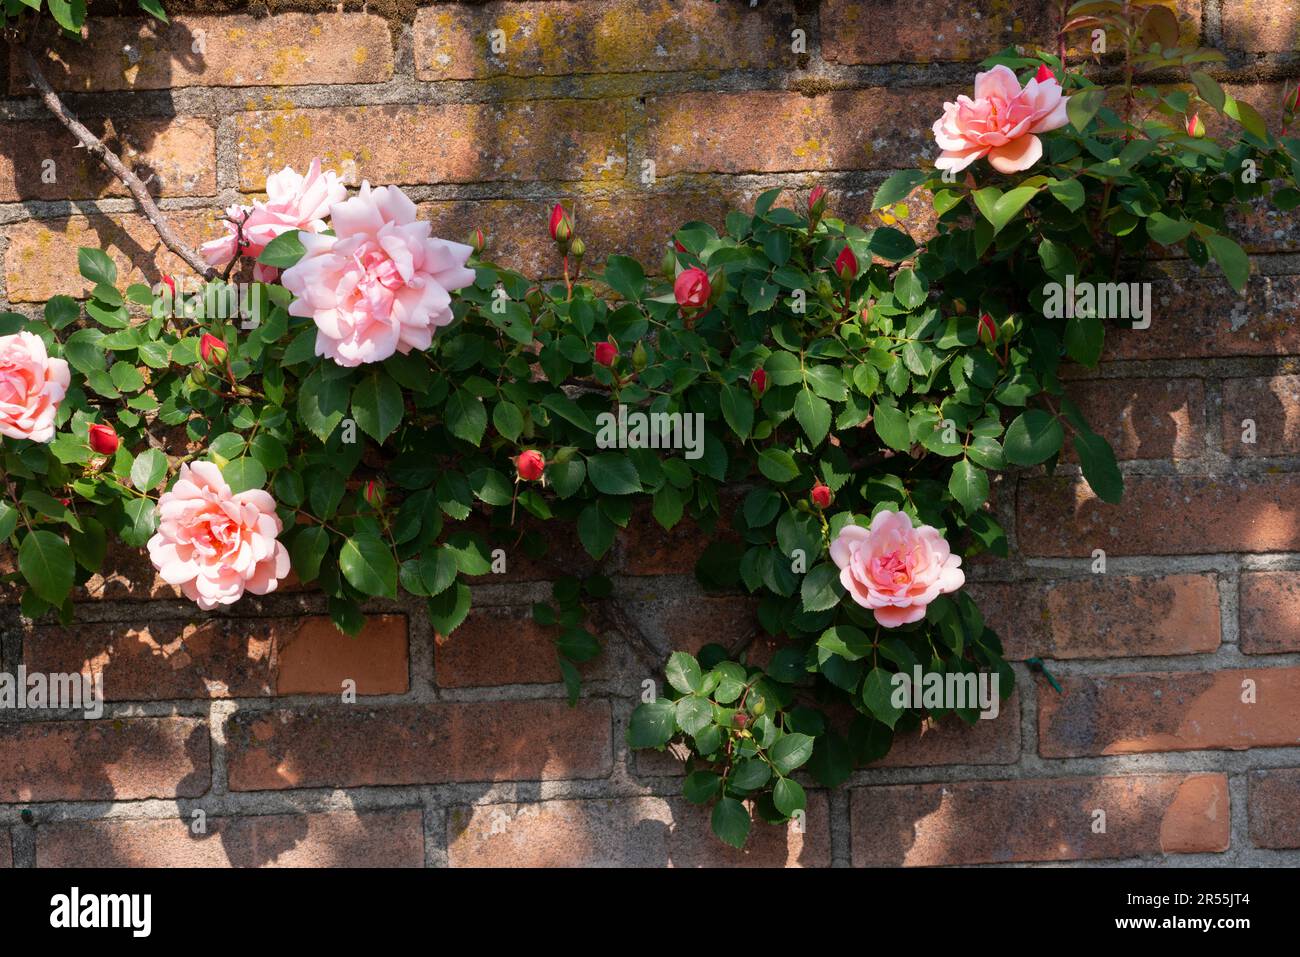 Flowers of a Pink Roses Background Brick Wall Stock Photo